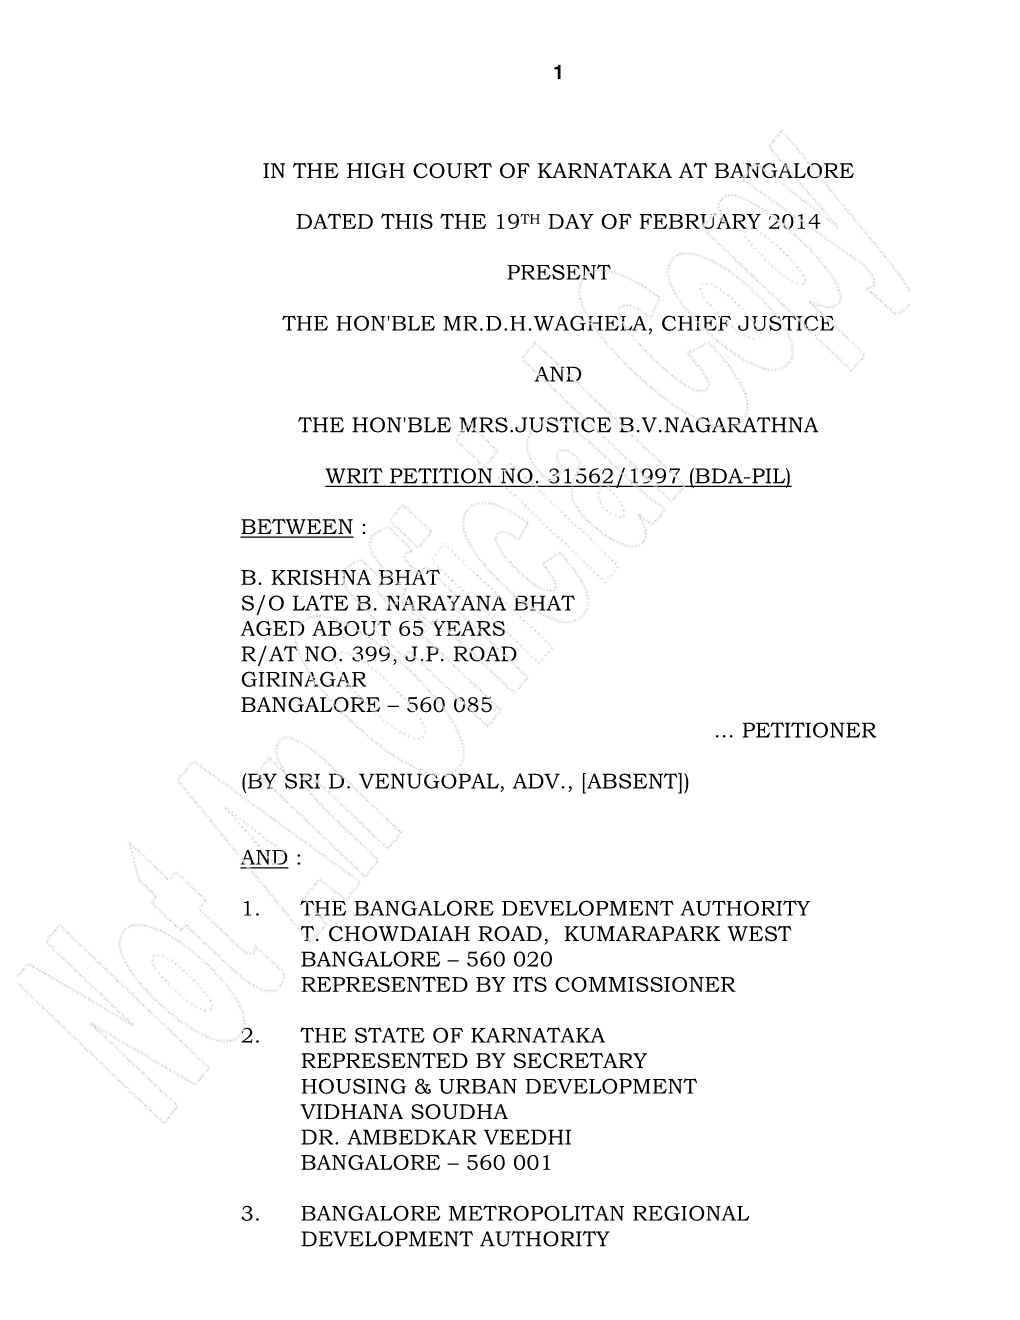 In the High Court of Karnataka at Bangalore Dated This the 19Th Day of February 2014 Present the Hon'ble Mr.D.H.Waghela, Chief J